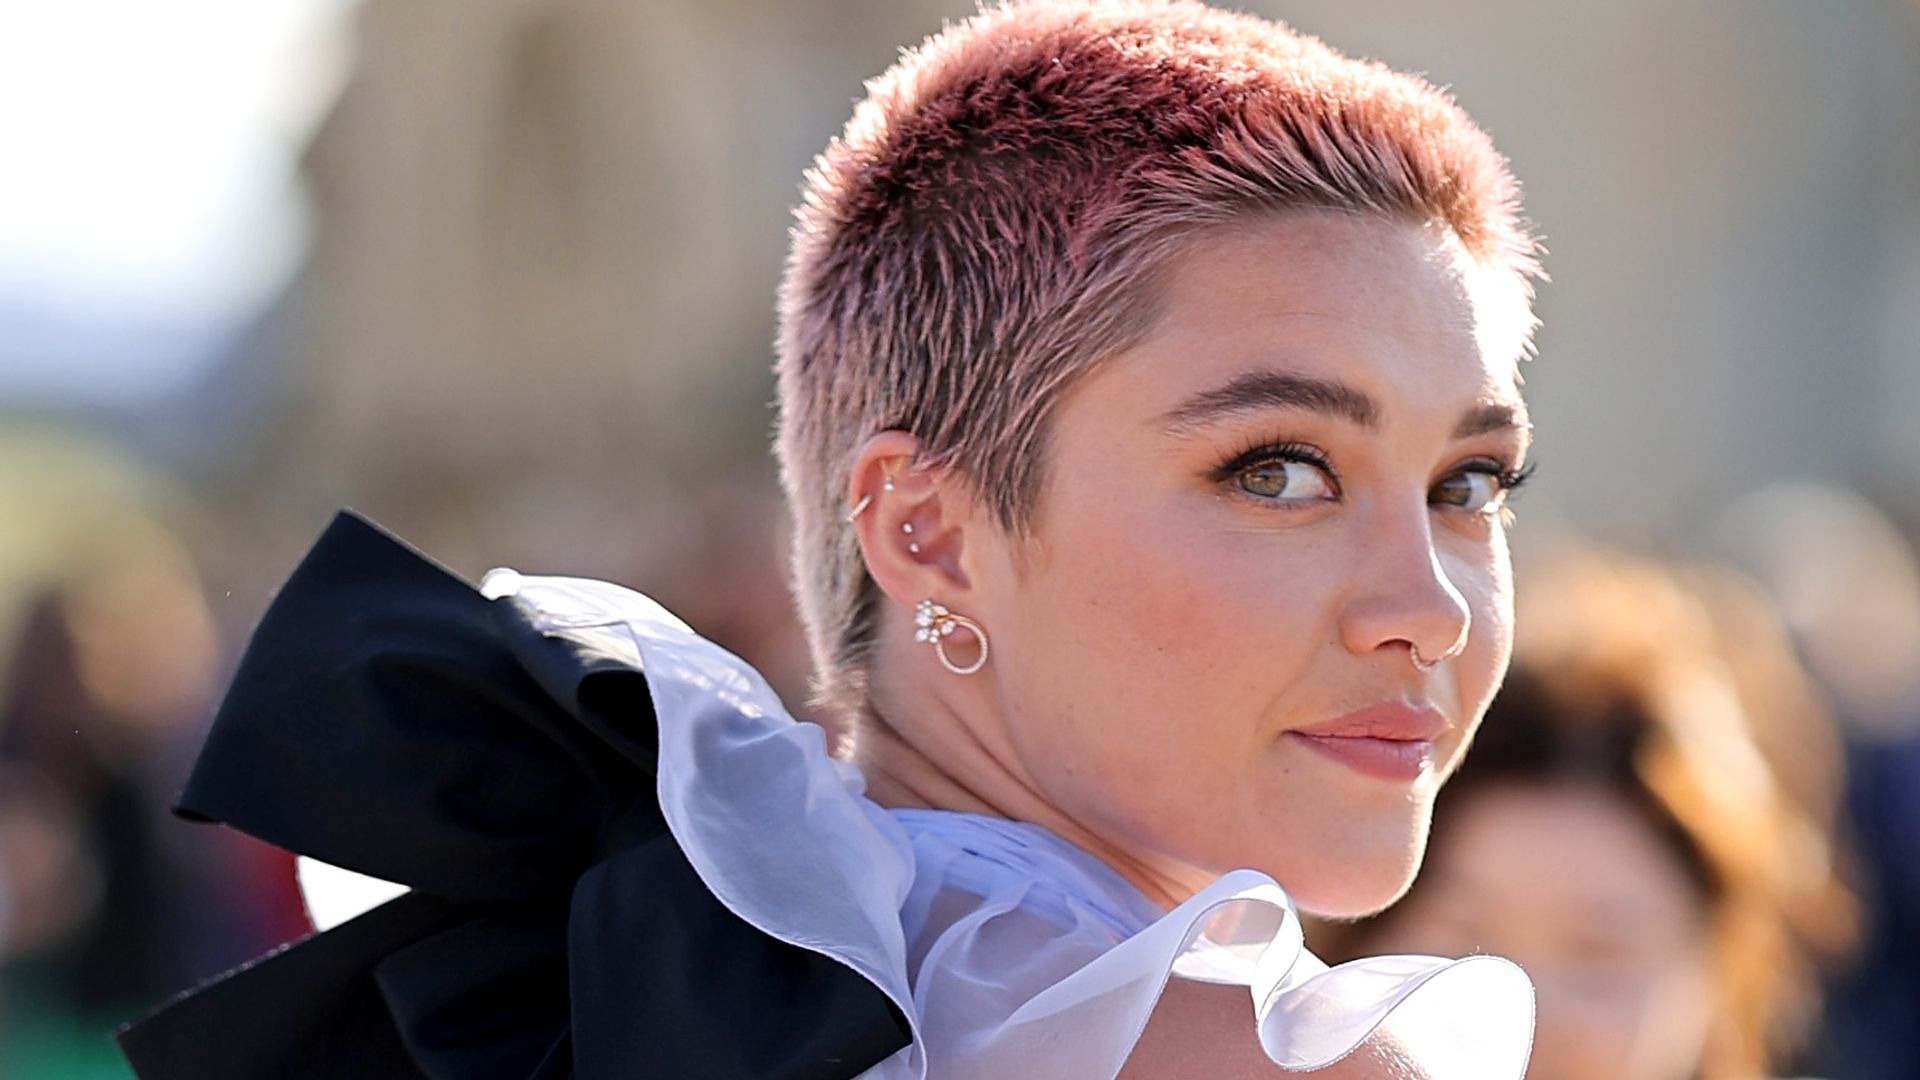 Florence Pugh attends the Valentino Haute Couture Fall/Winter 2023/2024 show as part of Paris Fashion Week at Chateau de Chantilly on July 05, 2023 in Chantilly, France. (Photo by Jacopo Raule/Getty Images)